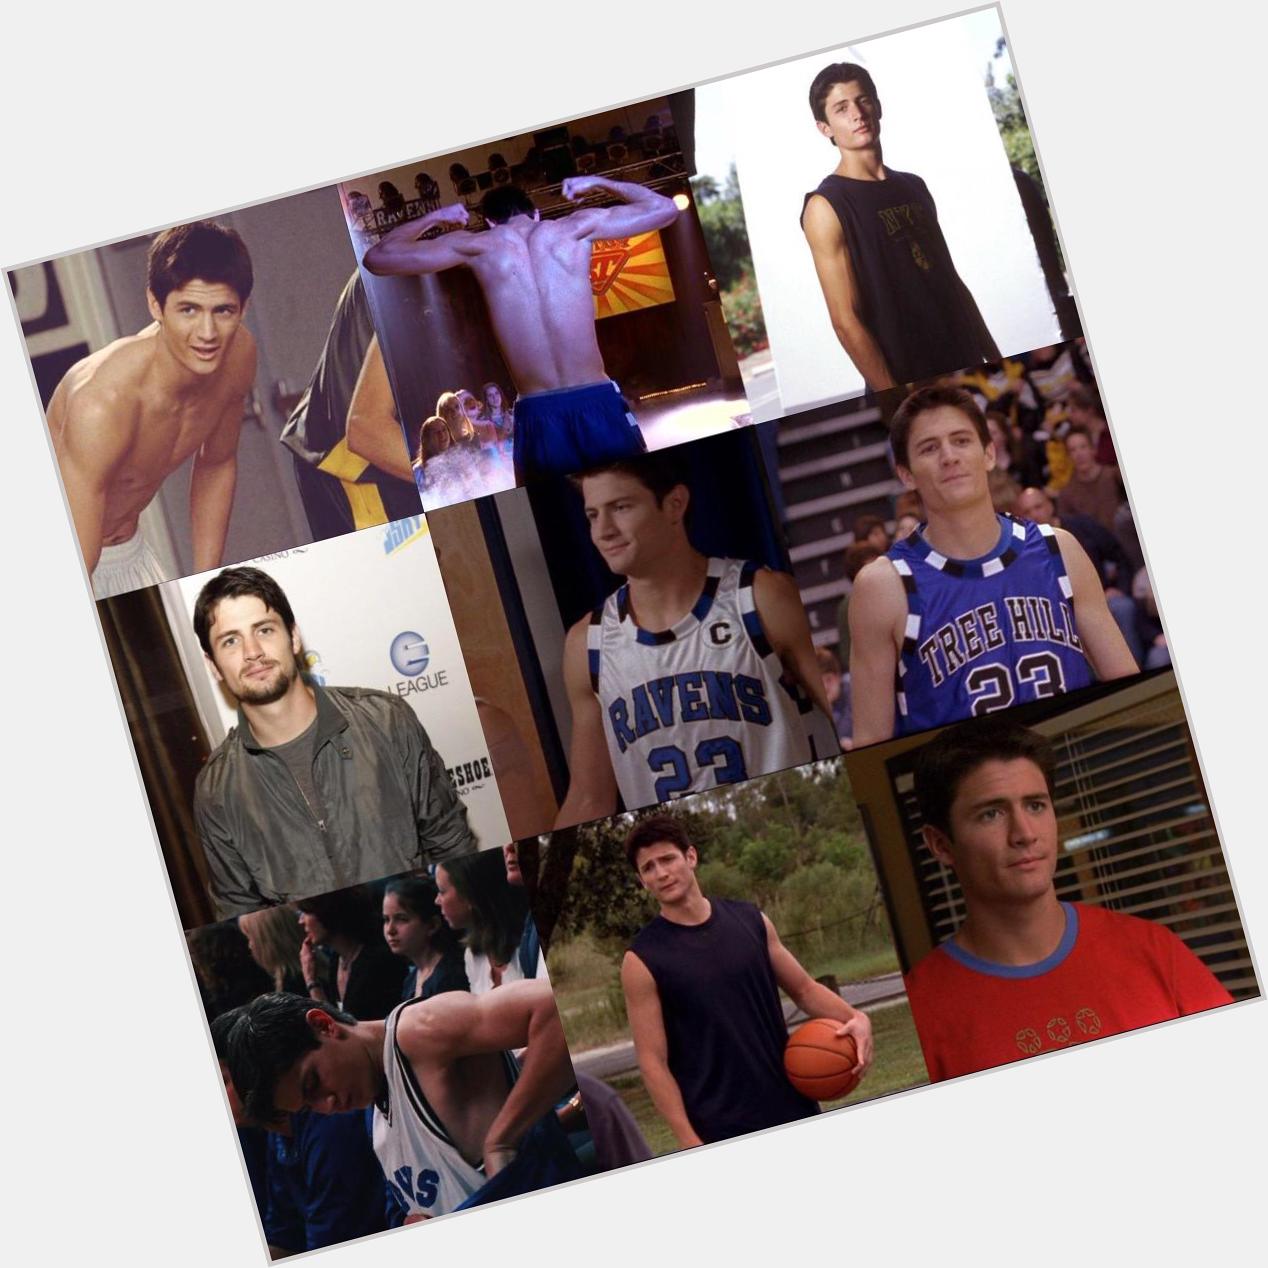 HAPPY BIRTHDAY TO MY MOST FAVORITE PERSON IN THIS WHOLE WORLD. THE LOVE OF MY LIFE NATHAN SCOTT/JAMES LAFFERTY       